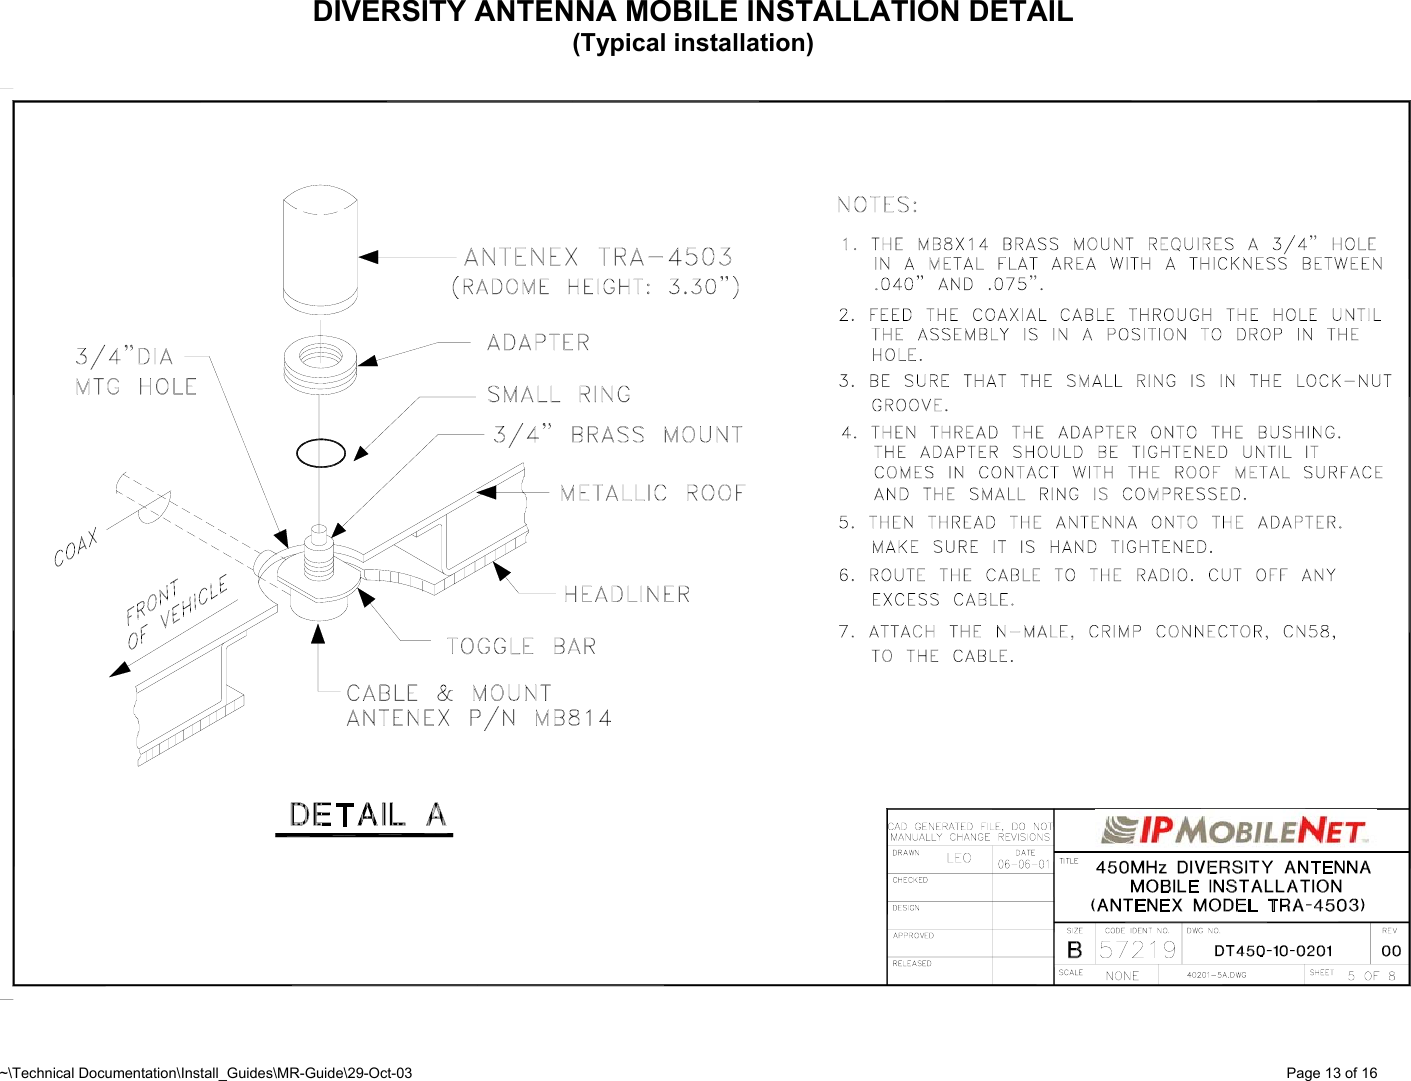 ~\Technical Documentation\Install_Guides\MR-Guide\29-Oct-03   Page 13 of 16 DIVERSITY ANTENNA MOBILE INSTALLATION DETAIL (Typical installation)   